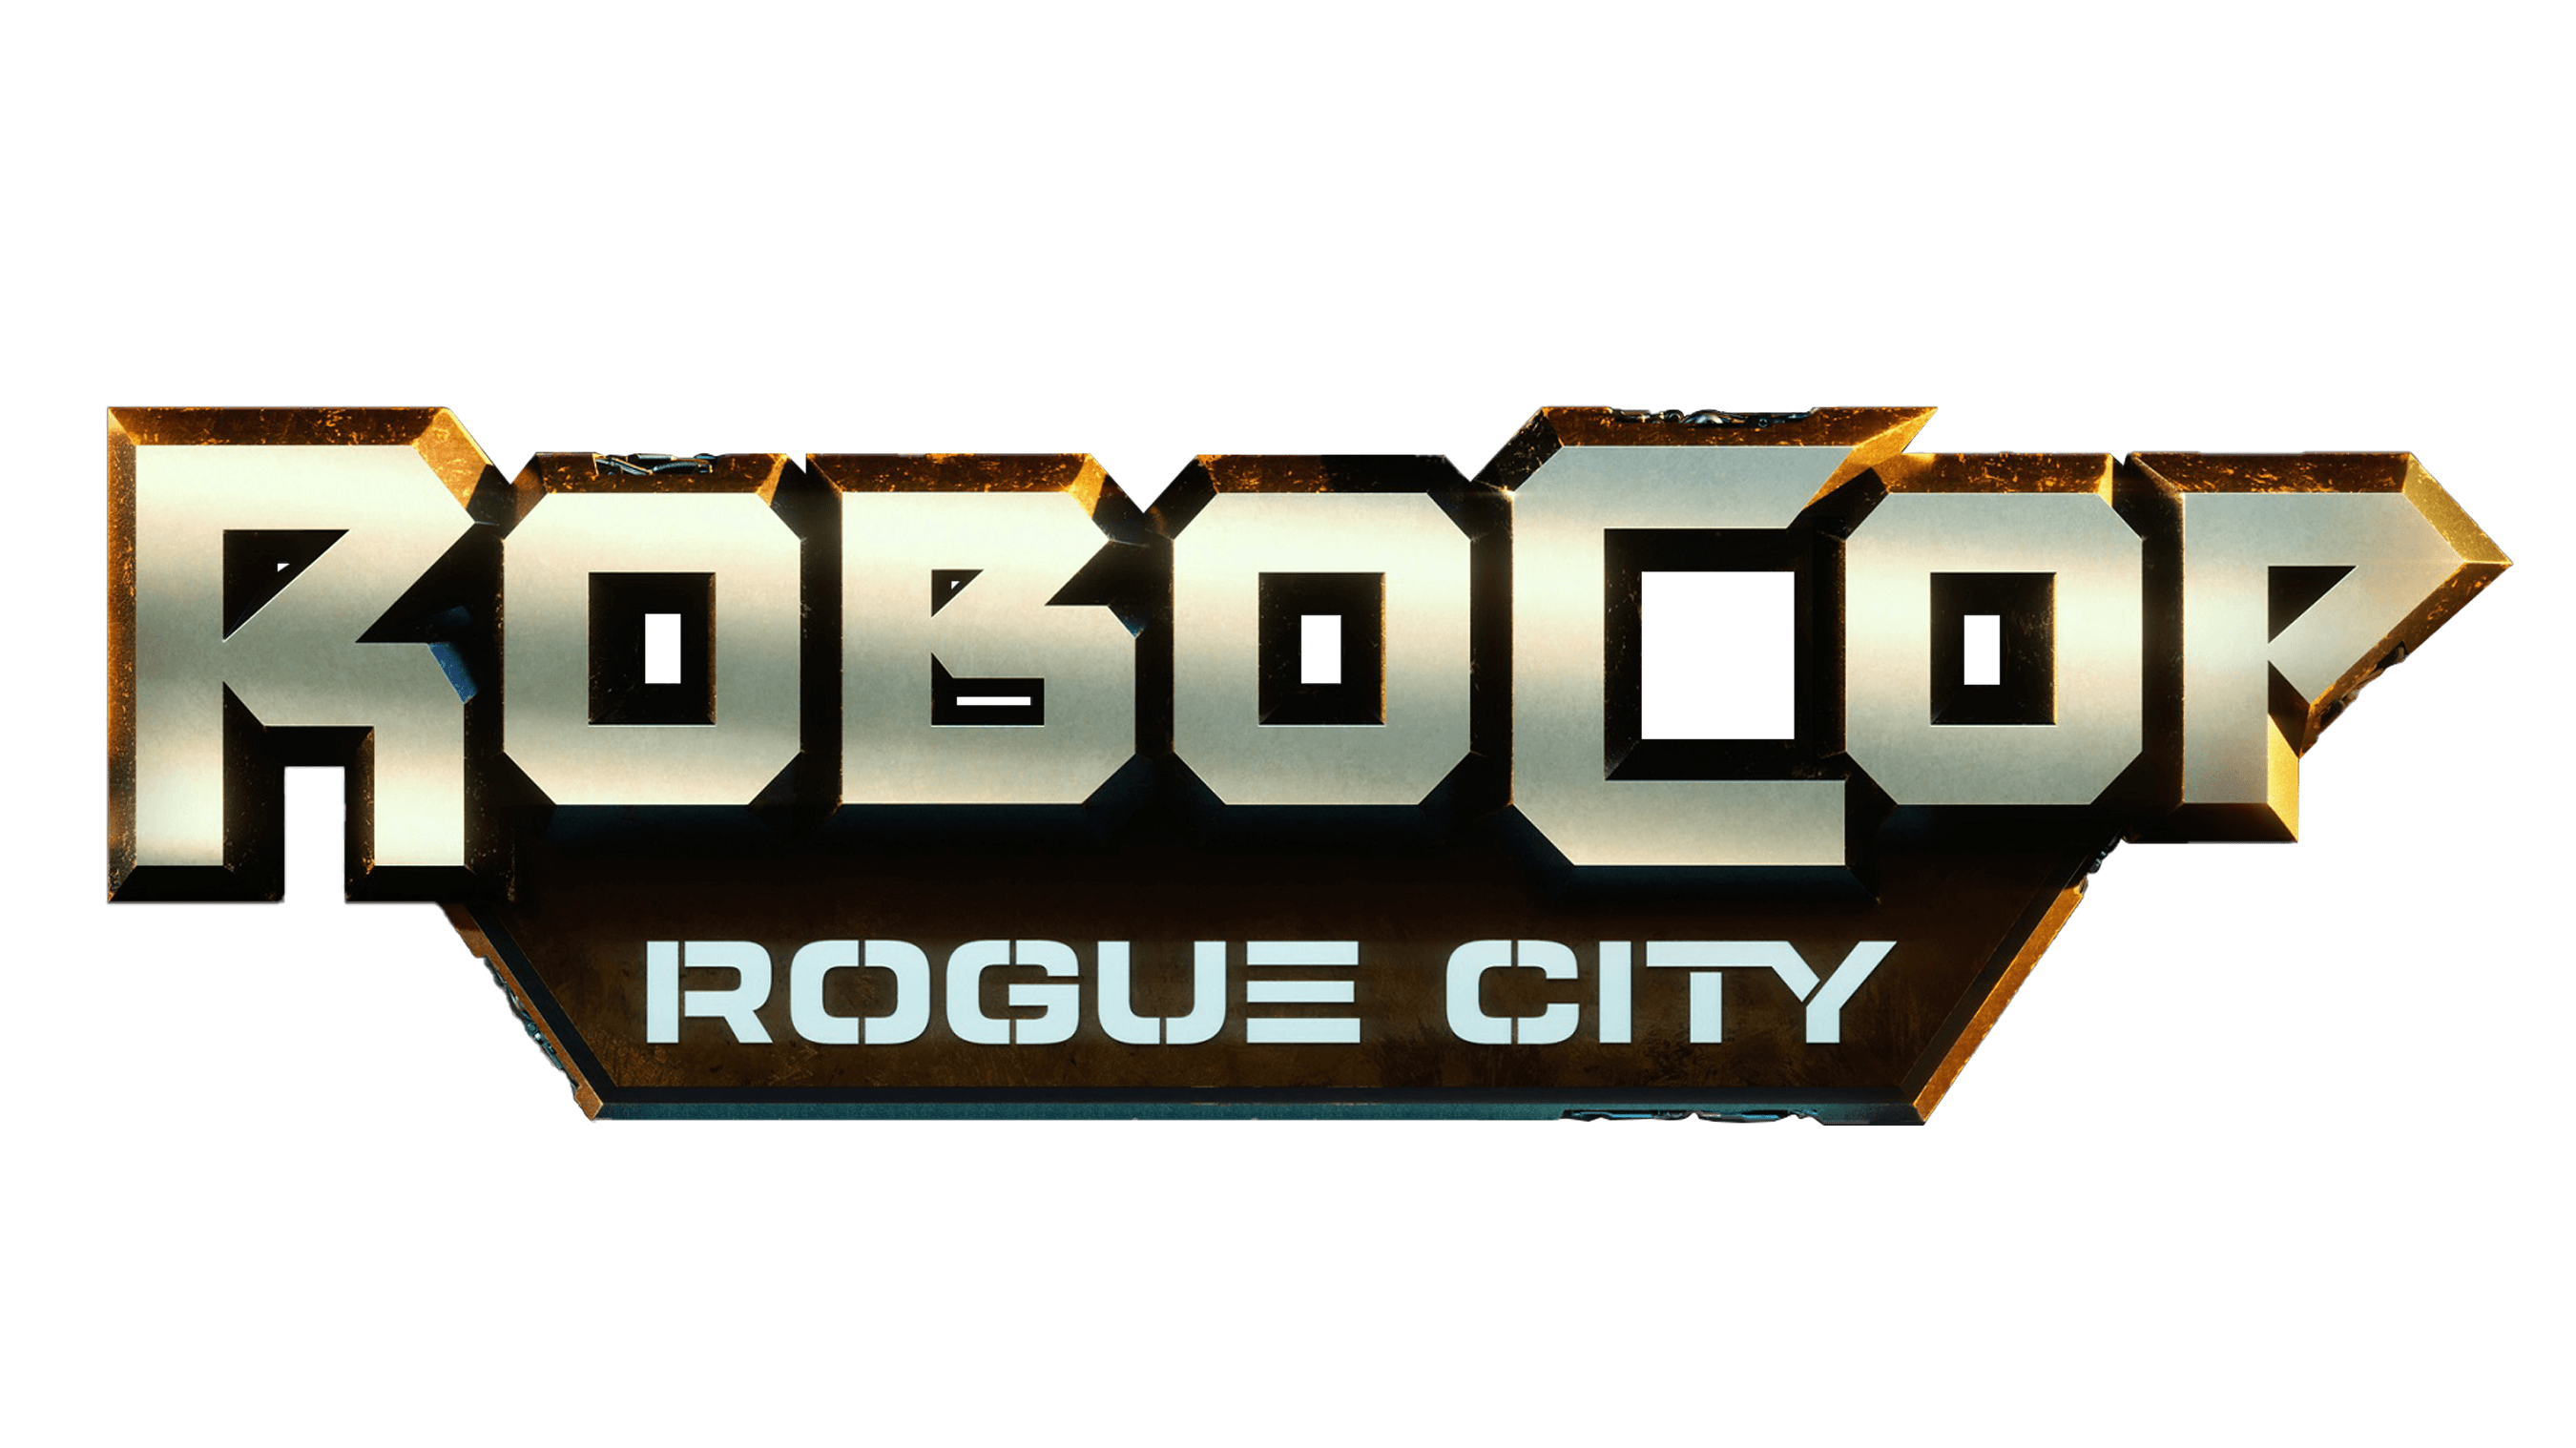 instal the last version for android RoboCop: Rogue City